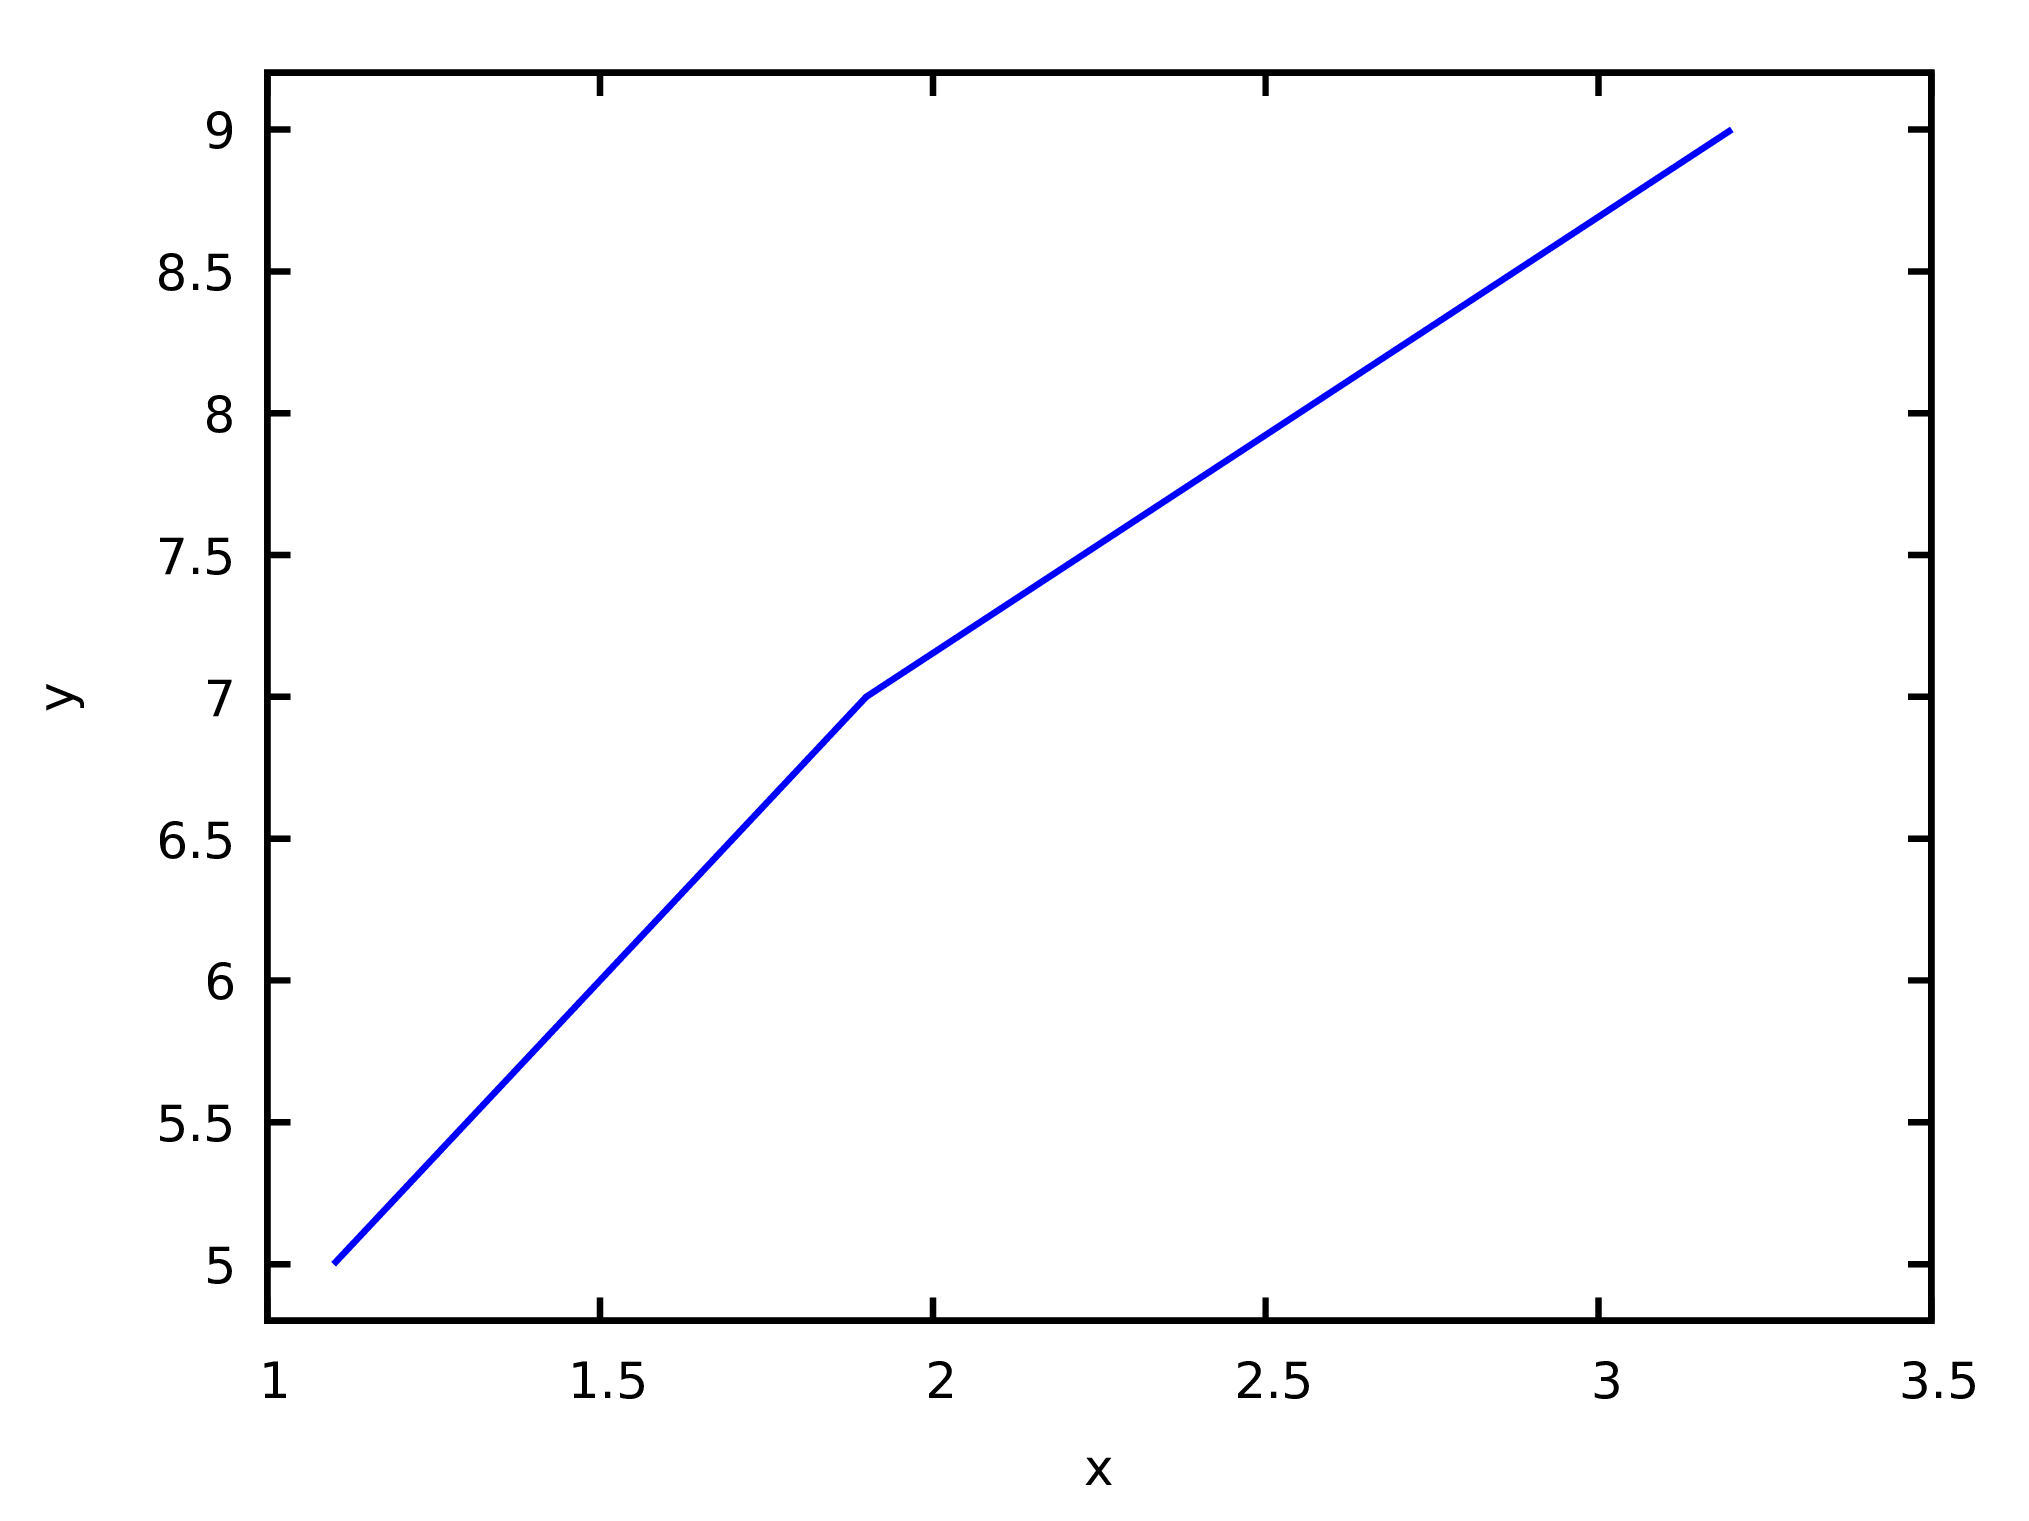 Plot of a line defined by three points.